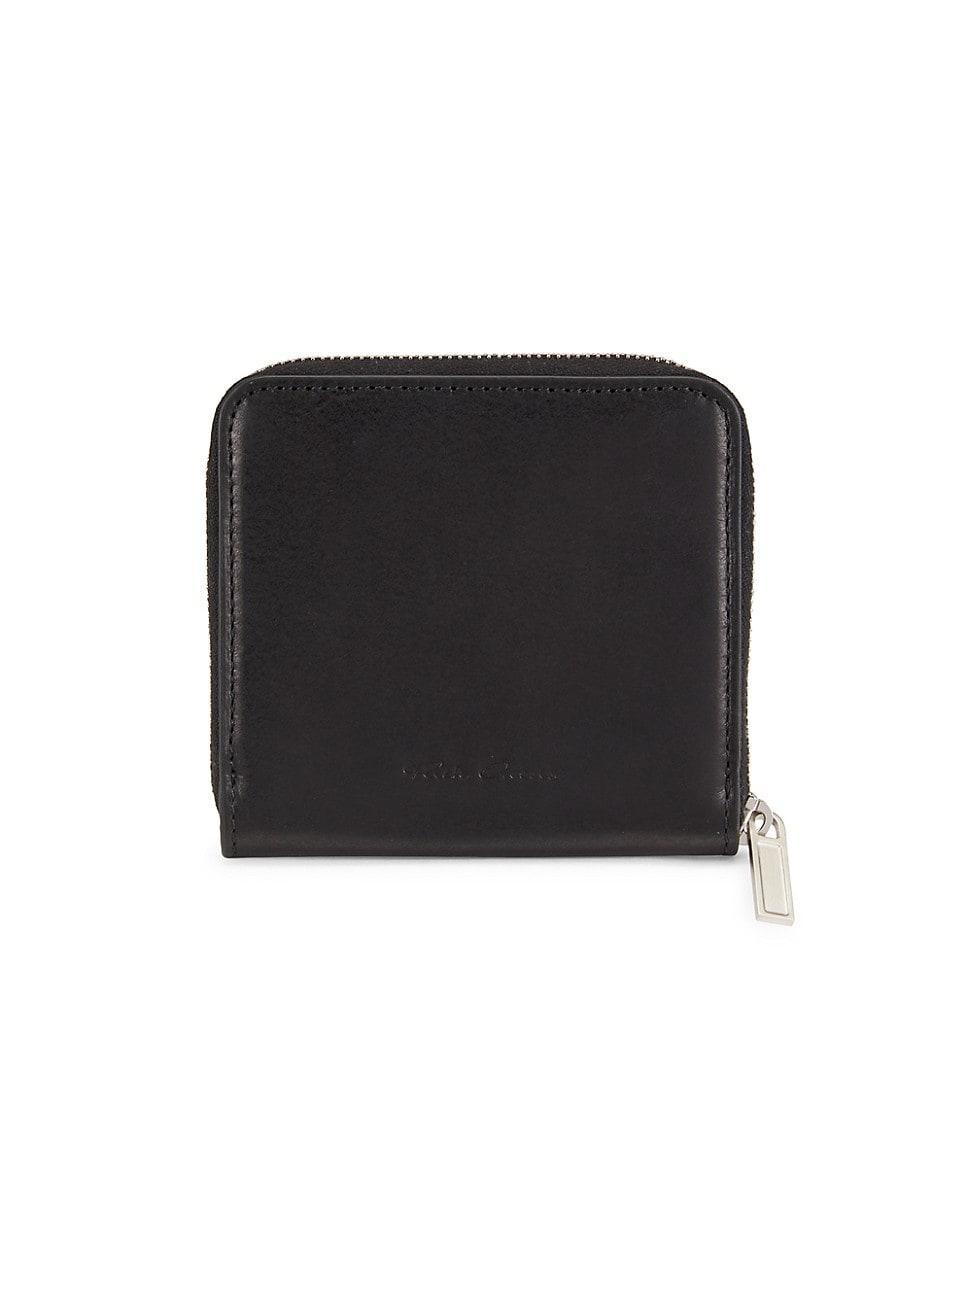 Mens Leather Zip Wallet Product Image